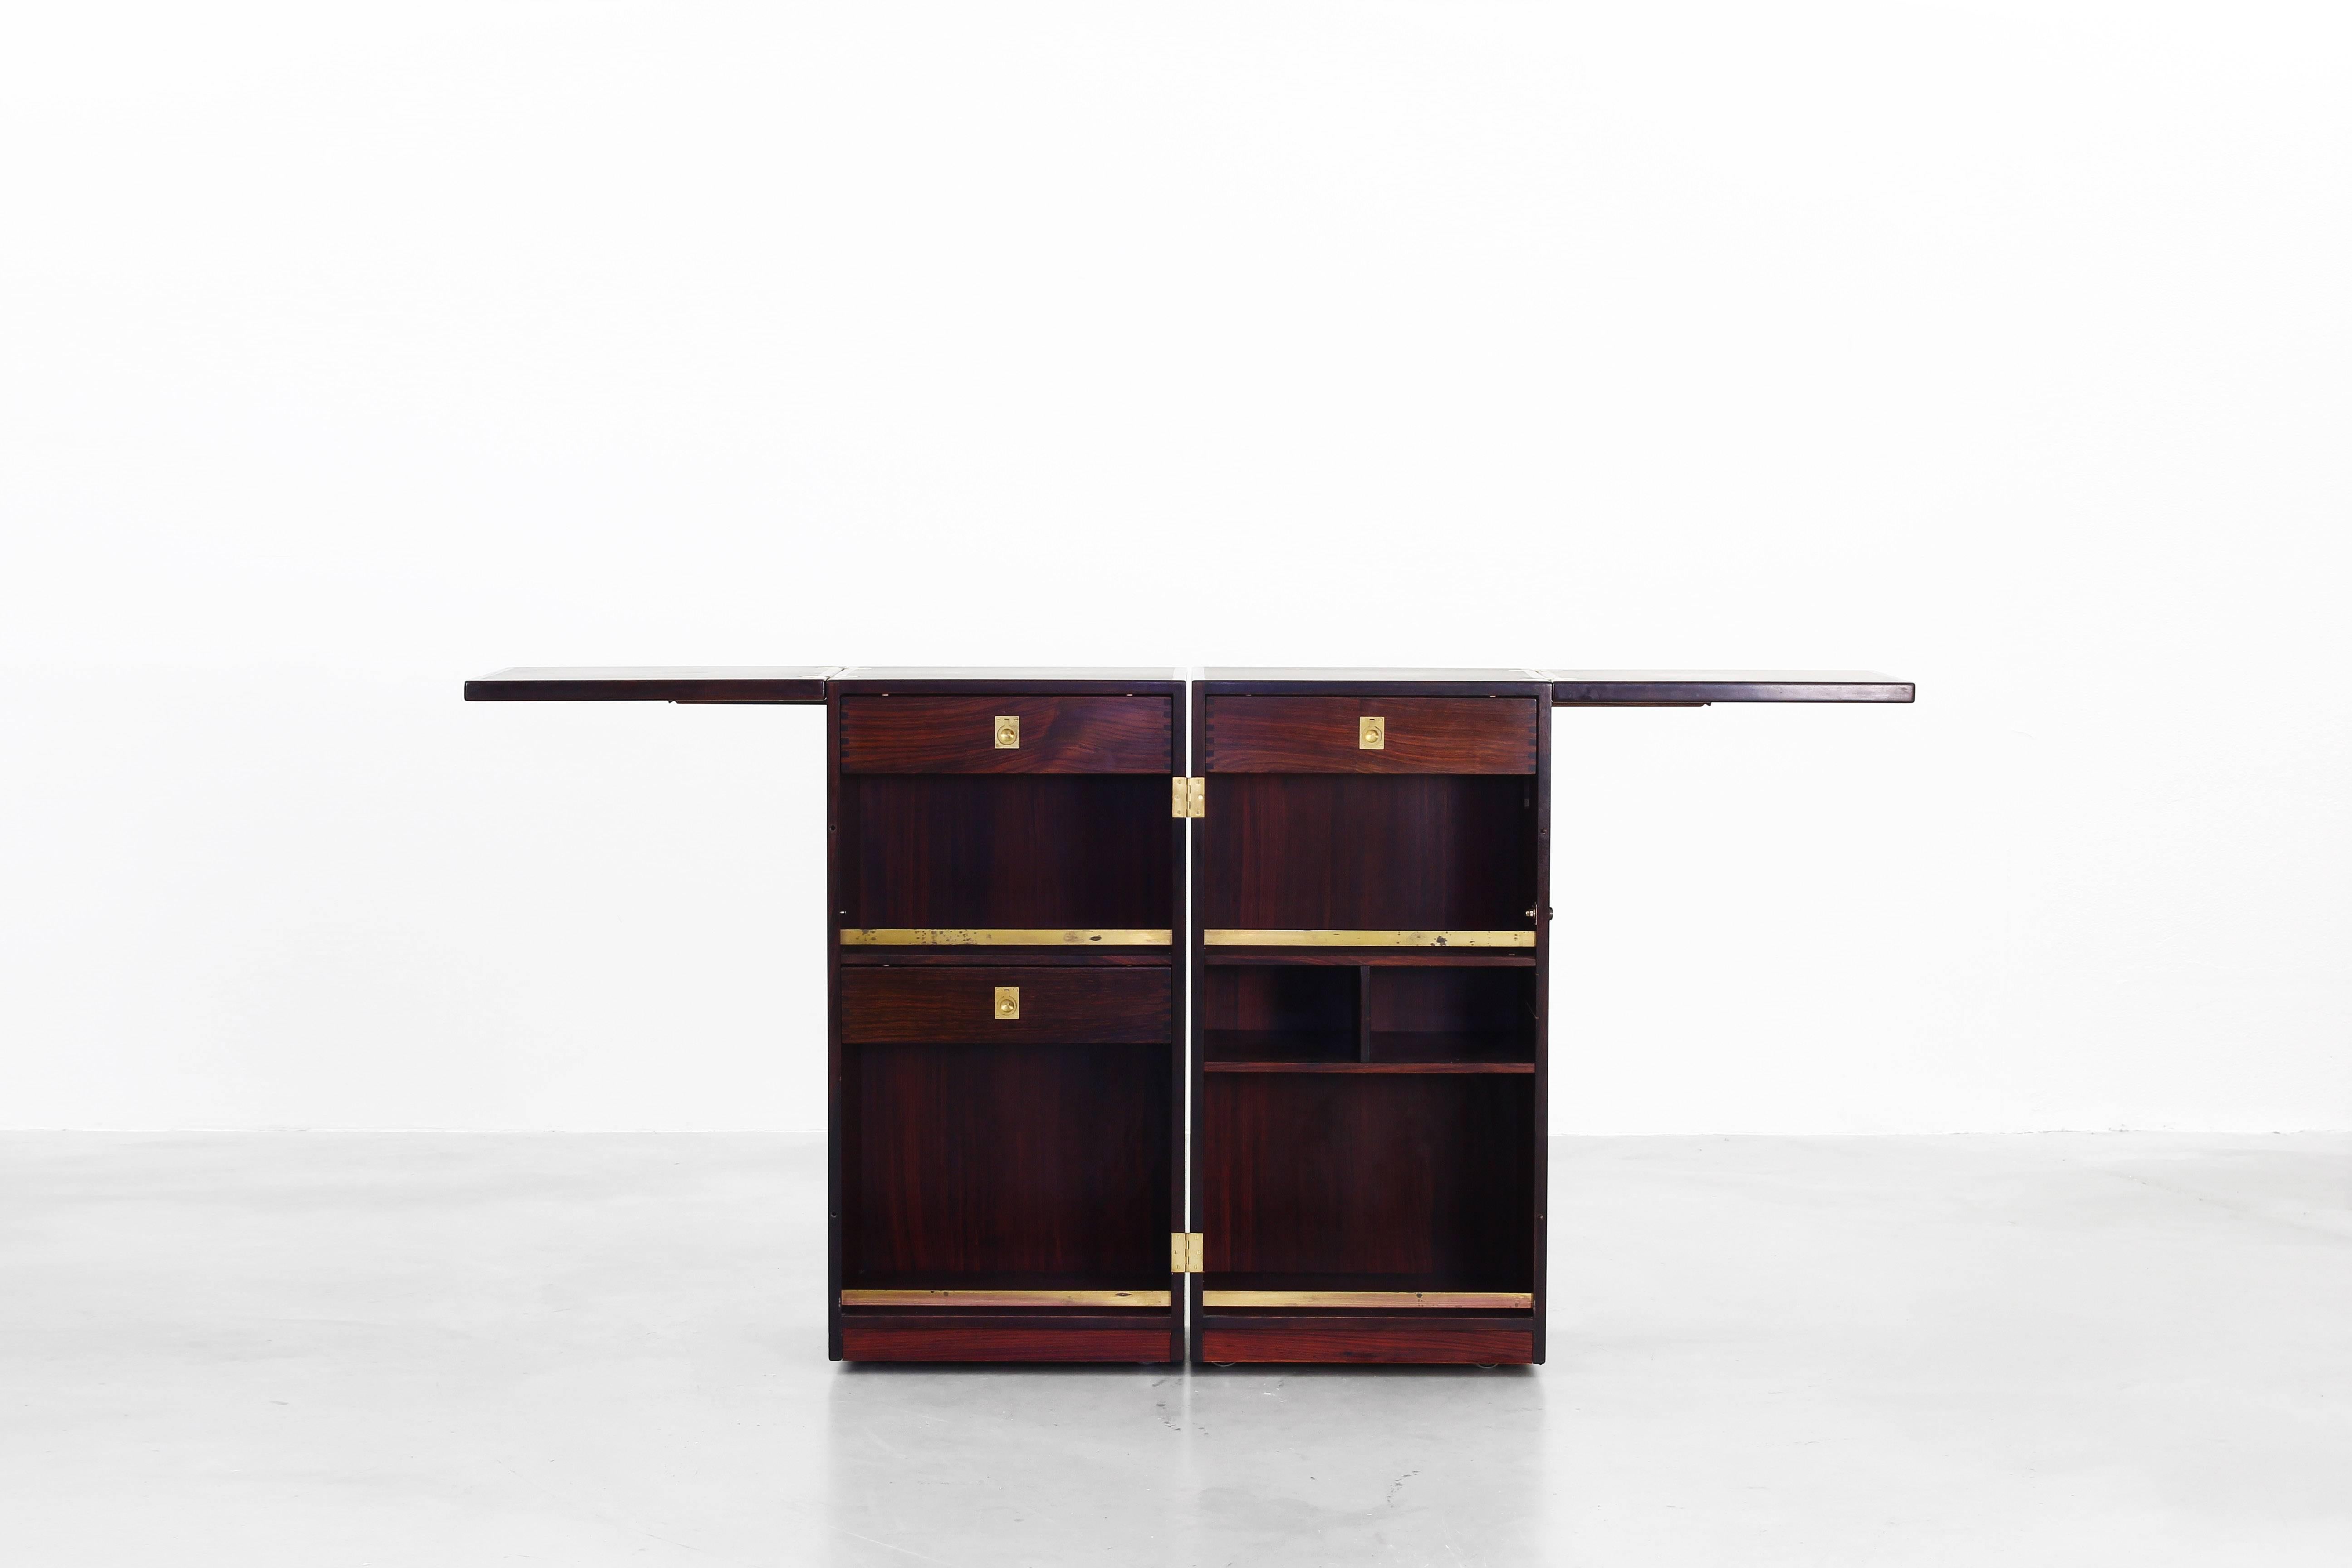 Very beautiful captains bar designed by Reno Wahl Iversen and manufactured by Dyrlund, Denmark in the 1950s. The bar is made of rosewood and brass elements and is a very good condition with just little traces of usage.